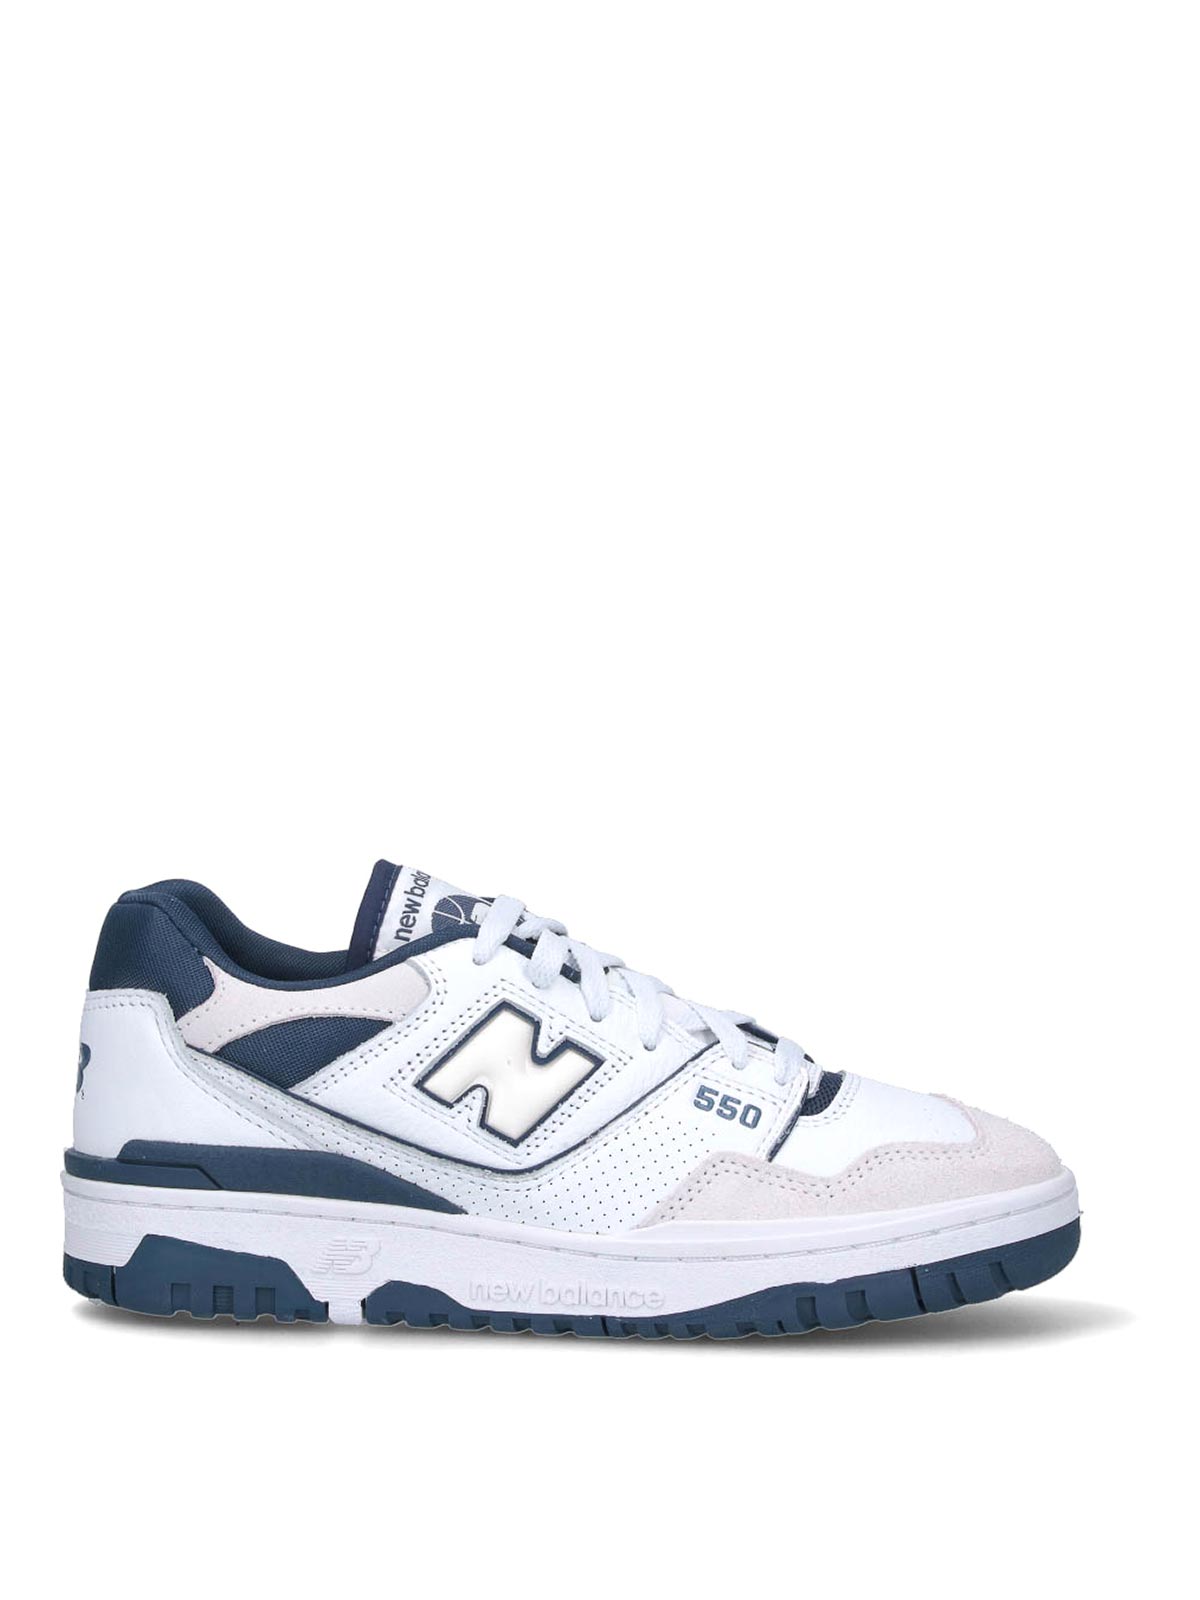 Buy Grey Sports Shoes for Men by NEW BALANCE Online | Ajio.com